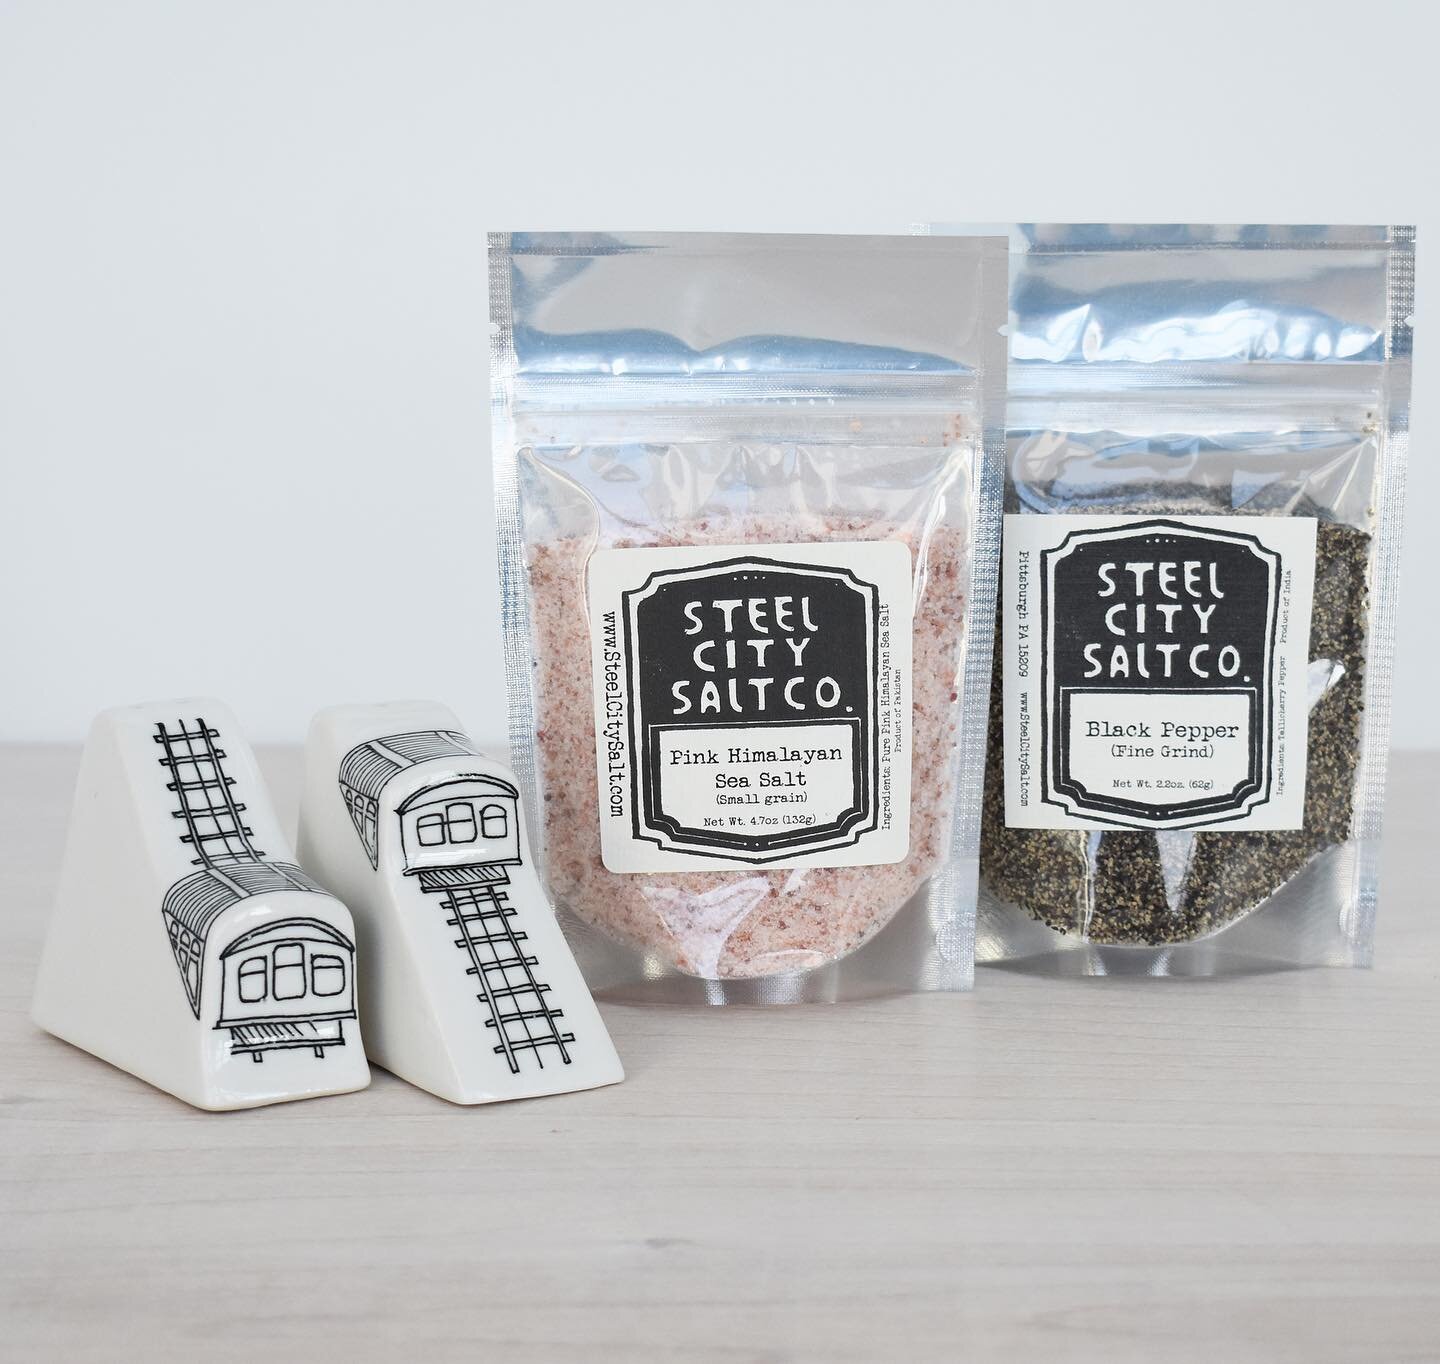 Our shop update is live! 

We are excited to share some fun new gift sets and collaborations! 

We are thrilled to be able to offer one of our very favorite local brands @steelcitysaltco  Pink Himalayan Sea Salt and fine Black Pepper paired with our 